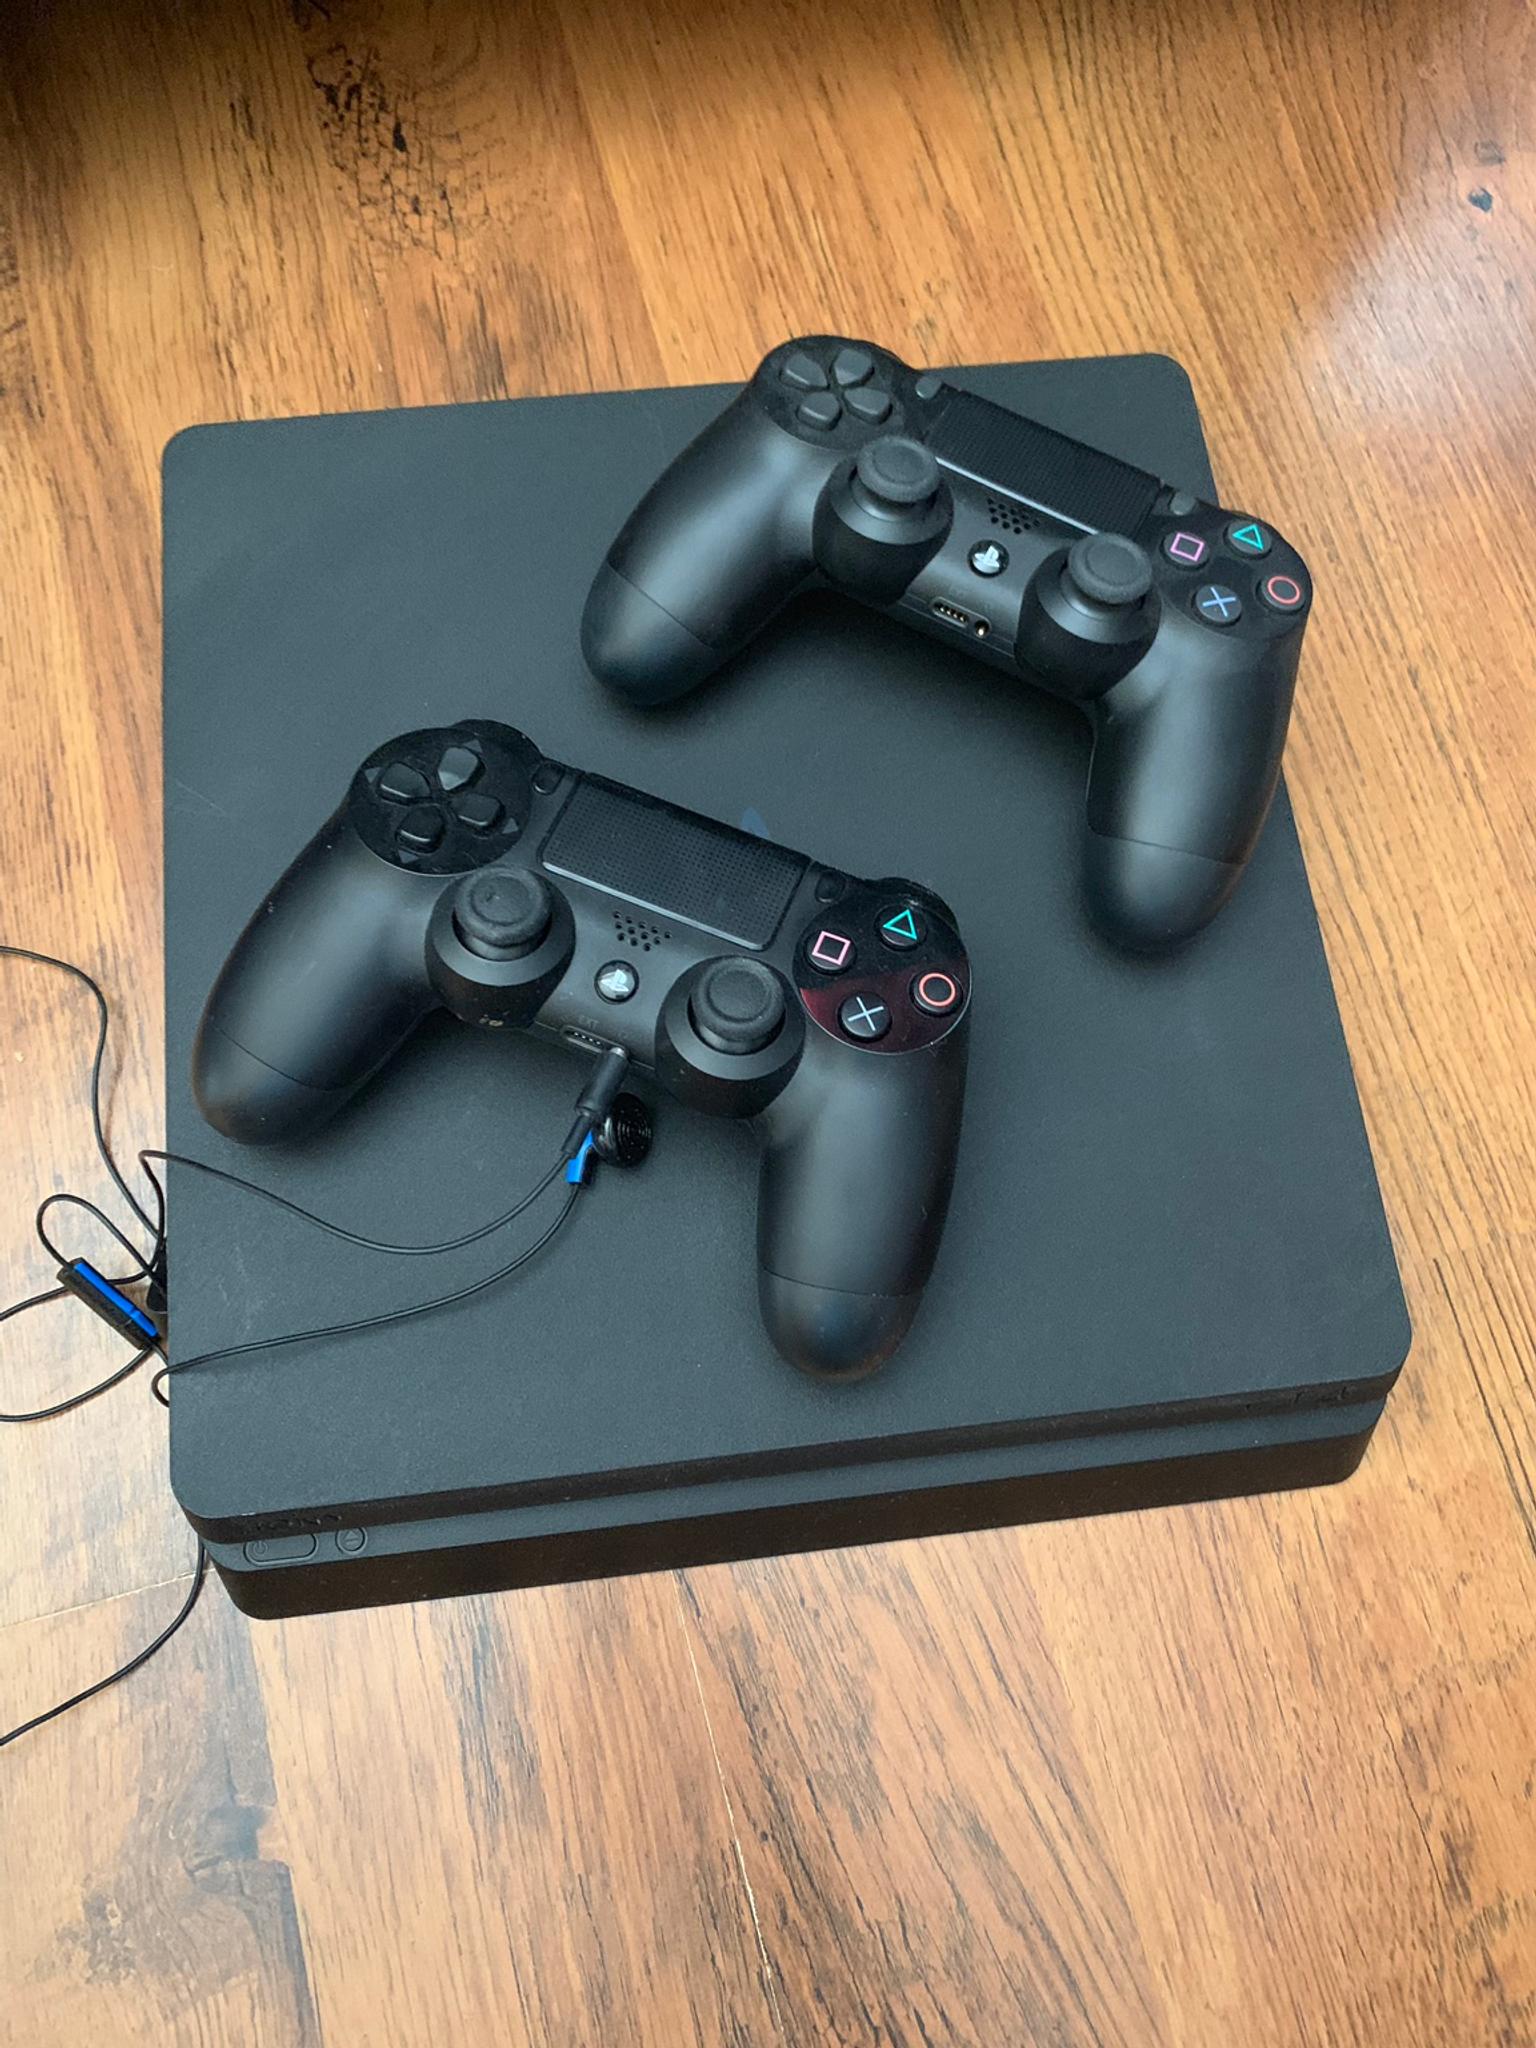 second hand ps4 consoles